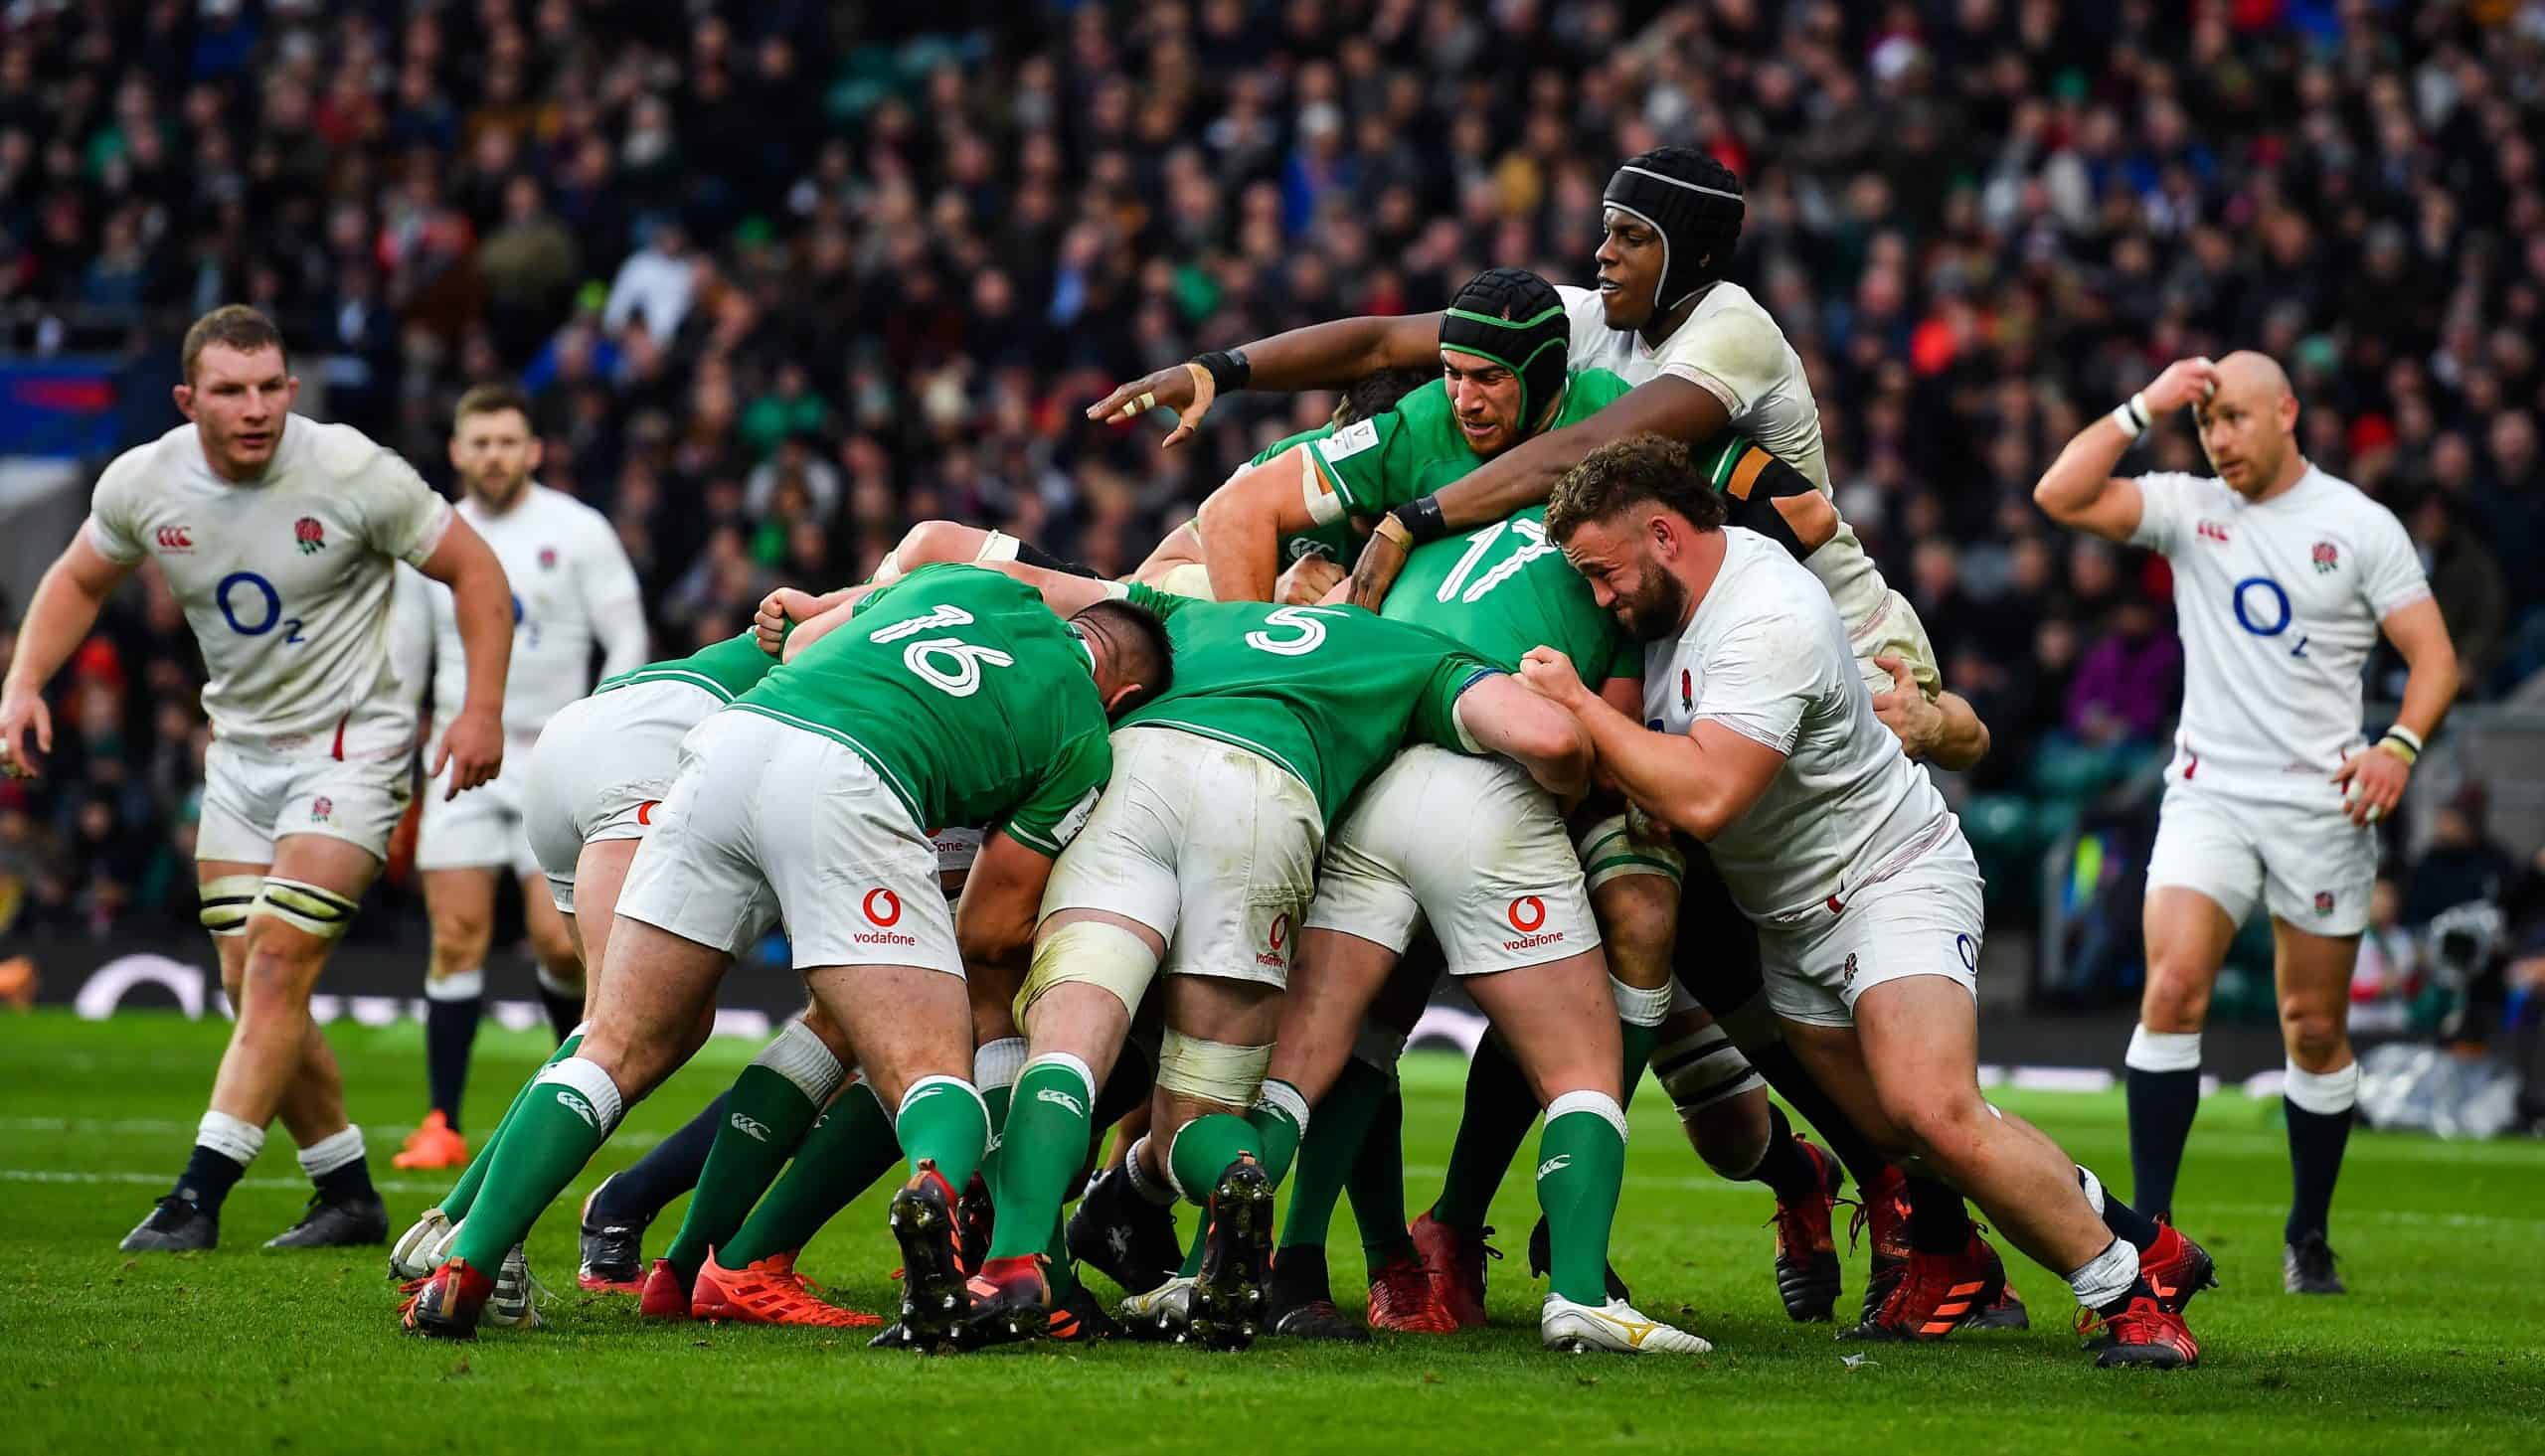 Six Nations Week 1: Ireland show they mean business